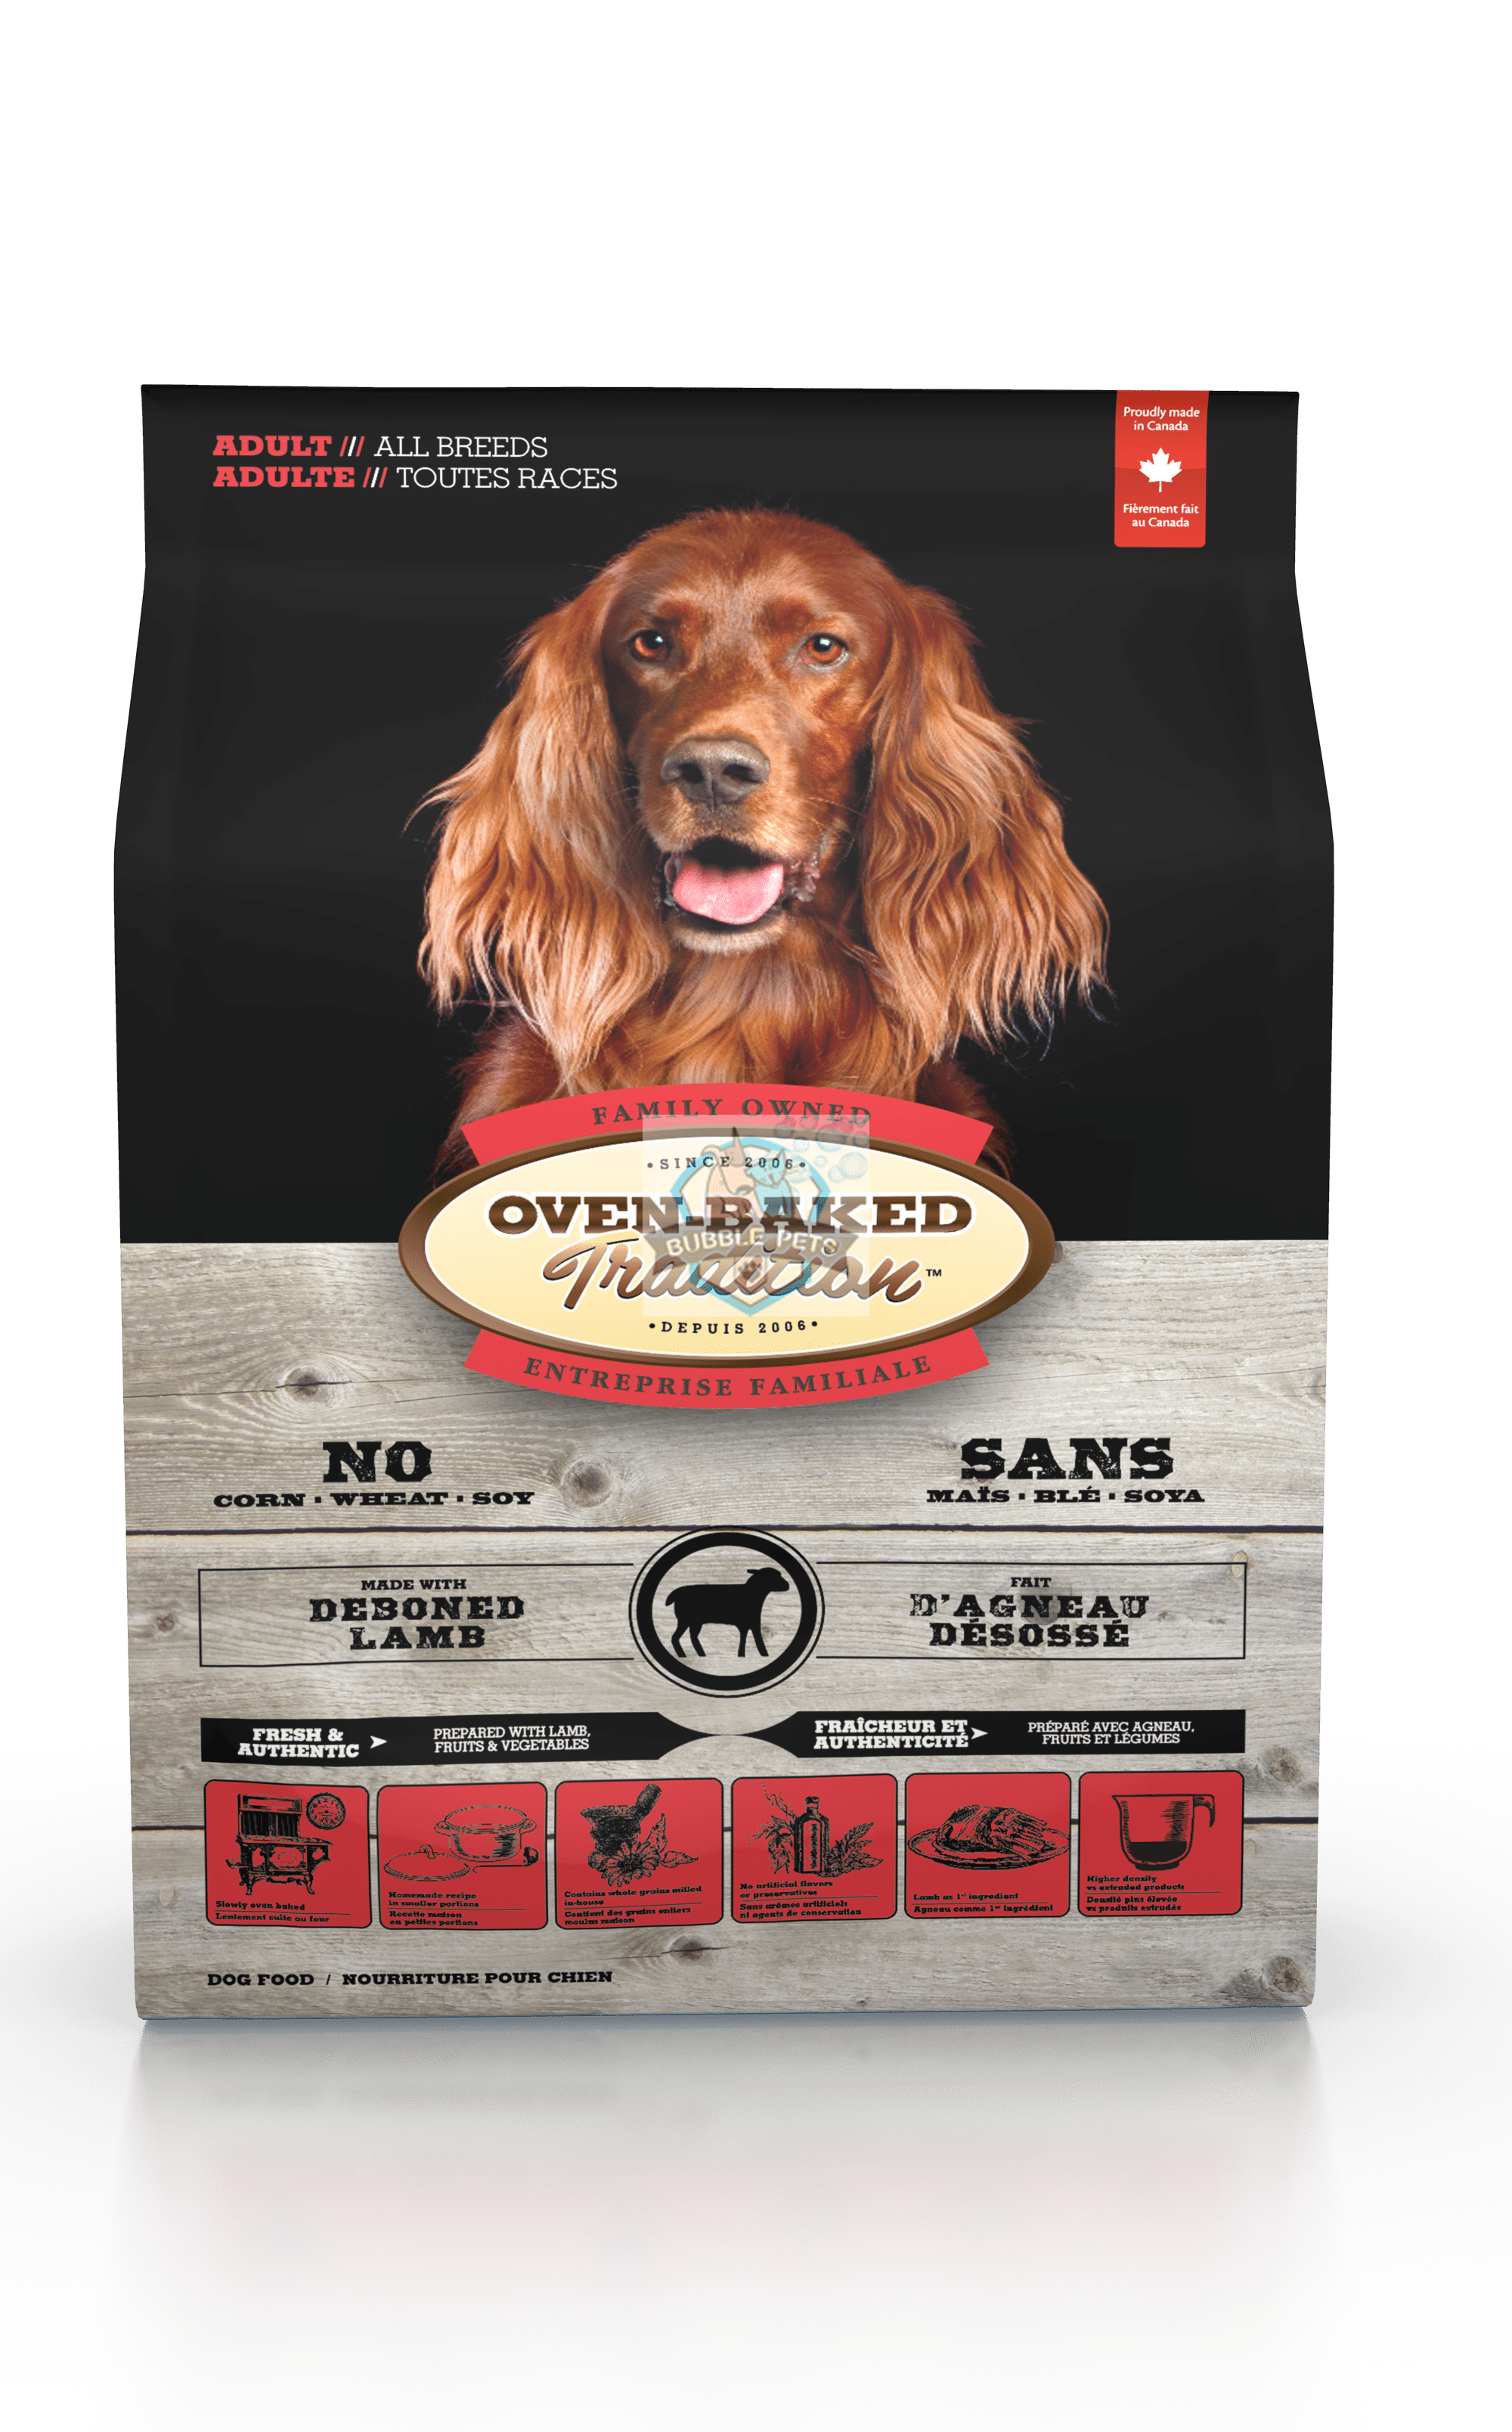 Oven Baked Tradition Adult Lamb Dog Food